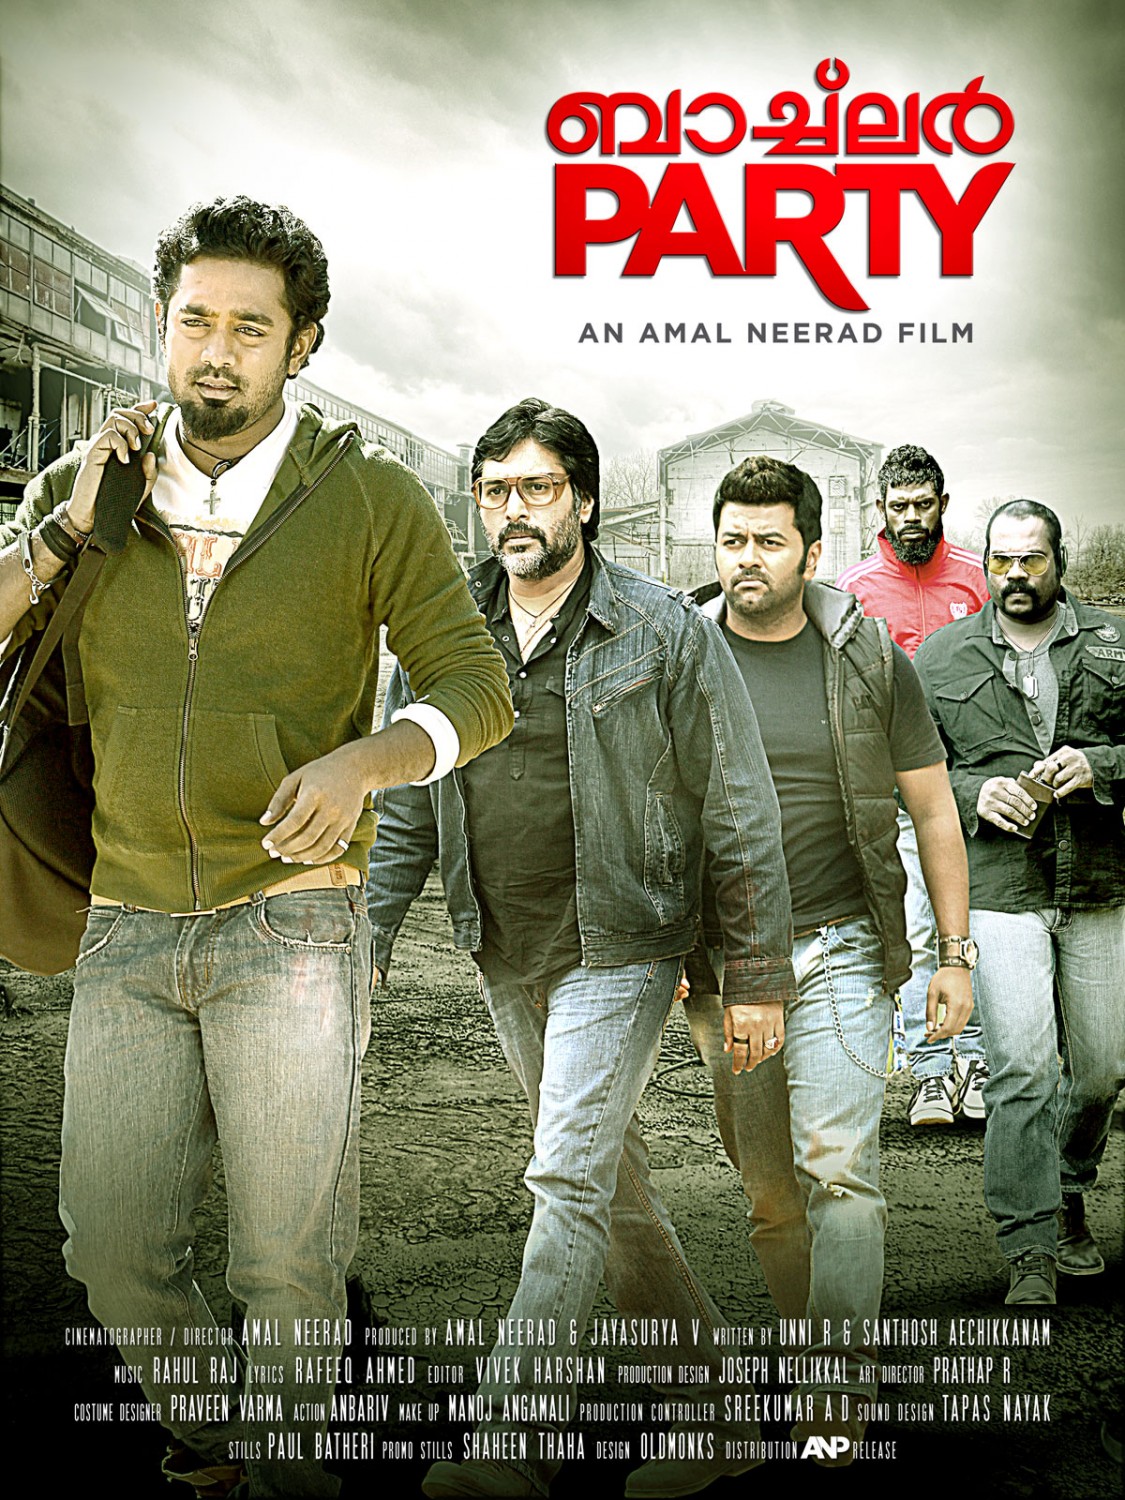 Bachelor Party (2012 film)